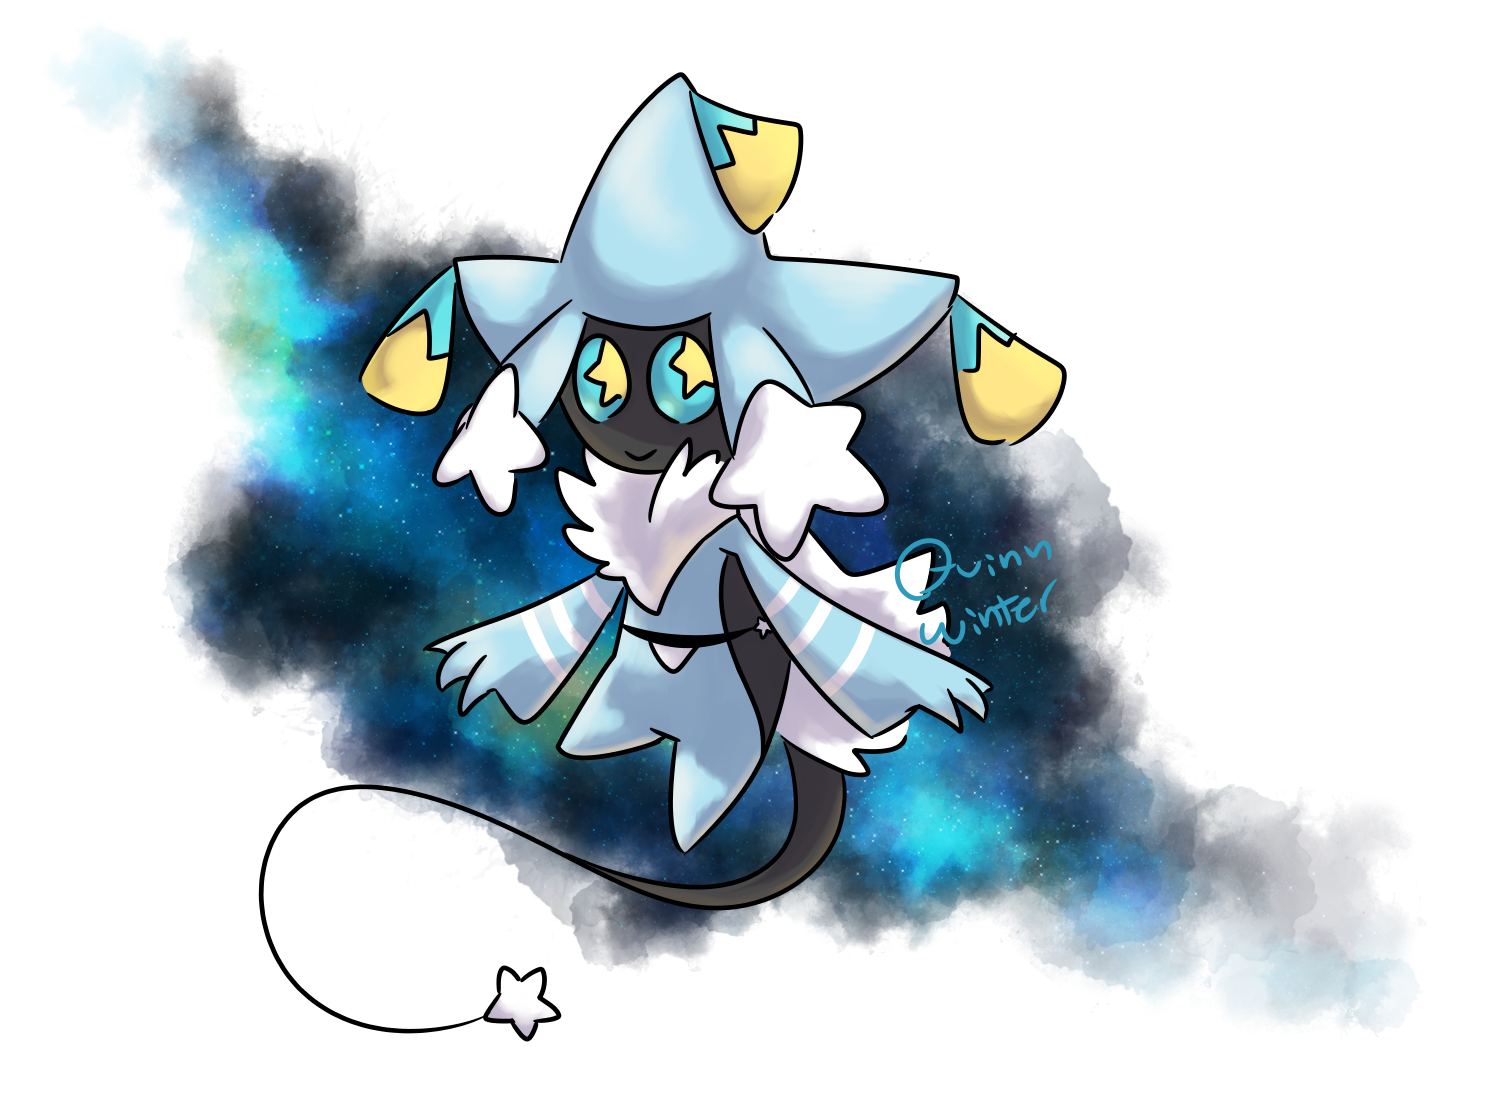 jirachi_fusion_by_quinnwinter-dcenww0.png